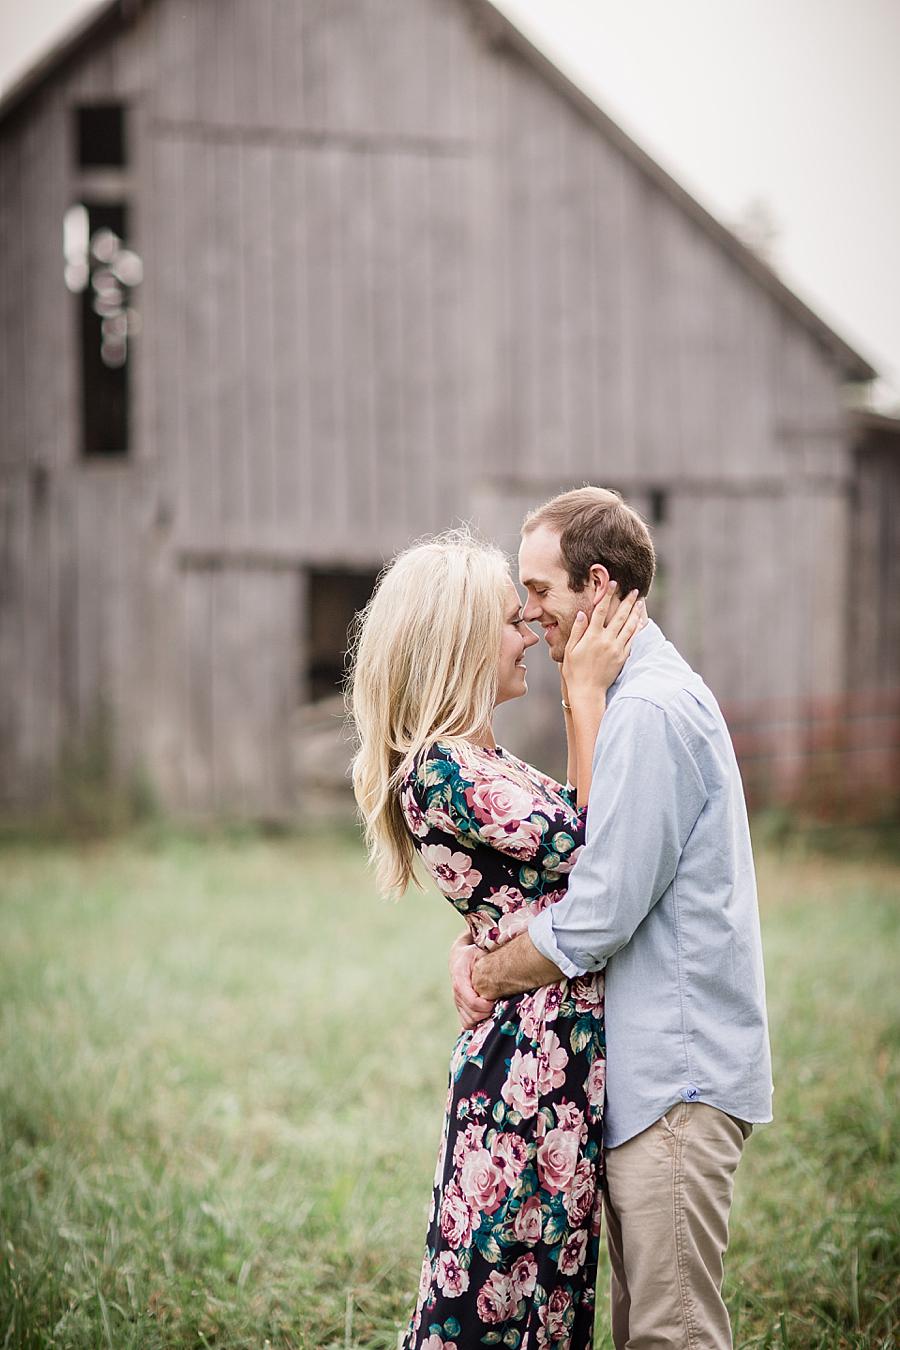 Barn at this Family Farm Engagement Session by Knoxville Wedding Photographer, Amanda May Photos.